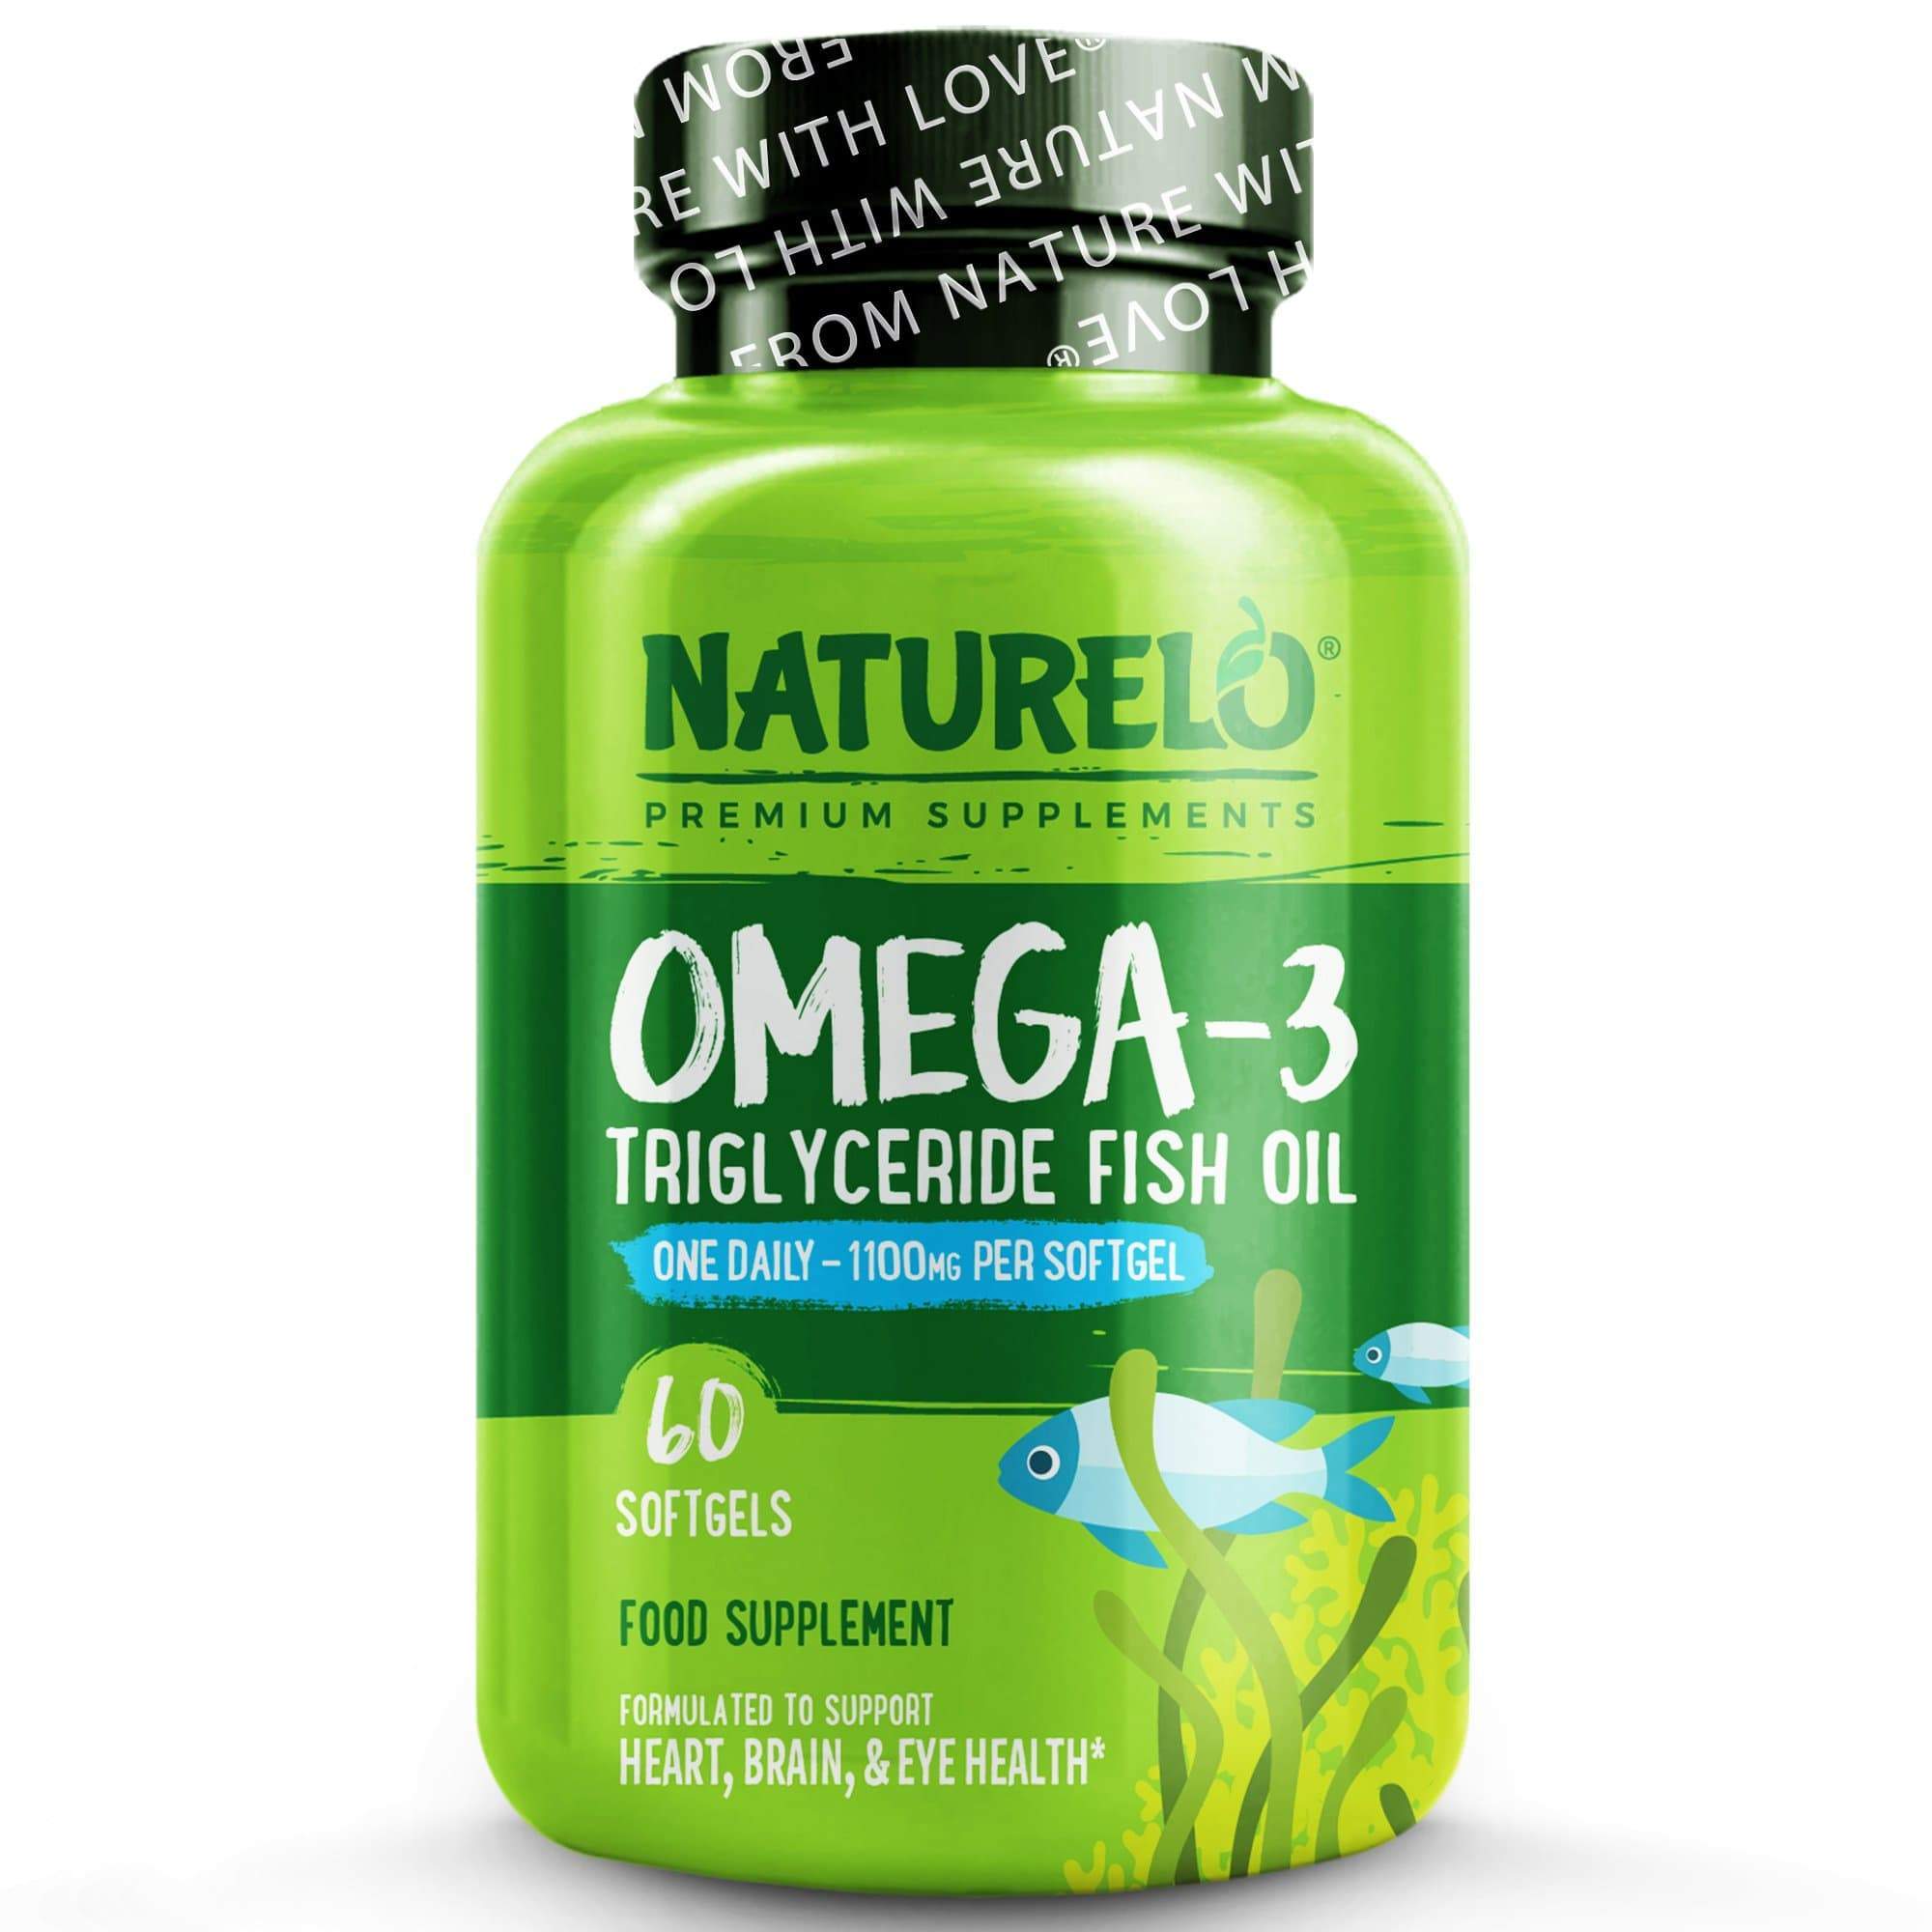 Premium Omega-3 Fish Oil - 1100 mg Triglyceride - One A Day